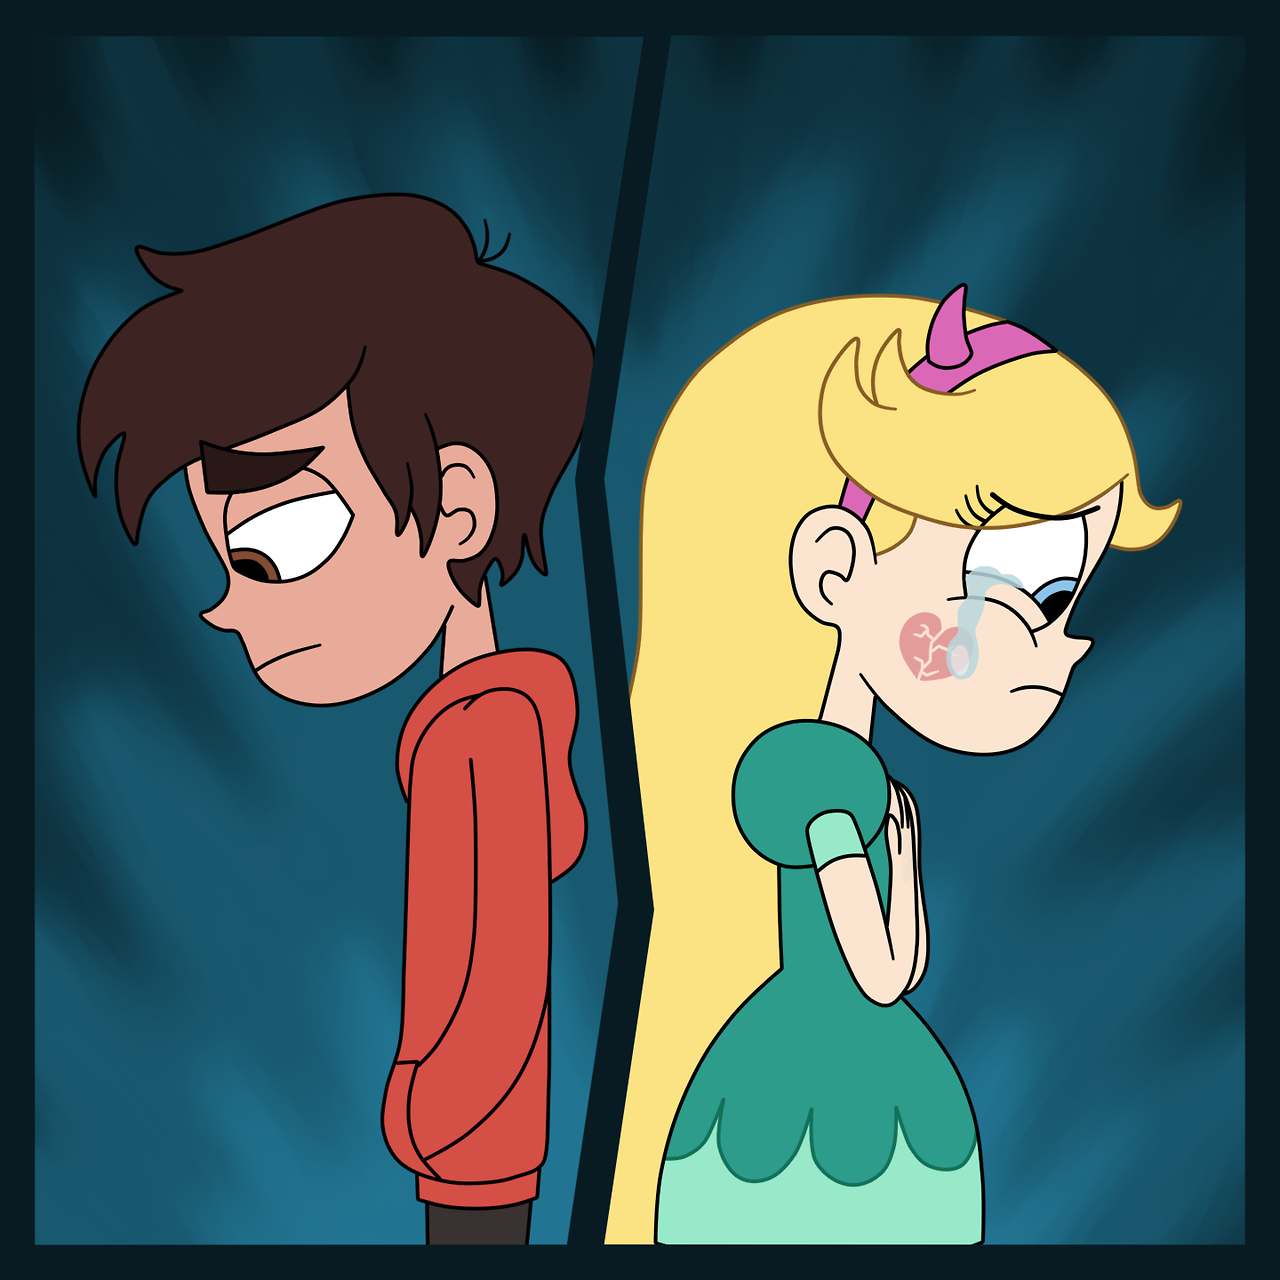 STAR & MARCO HAVE LEARNED AN ASL — What do Marco 